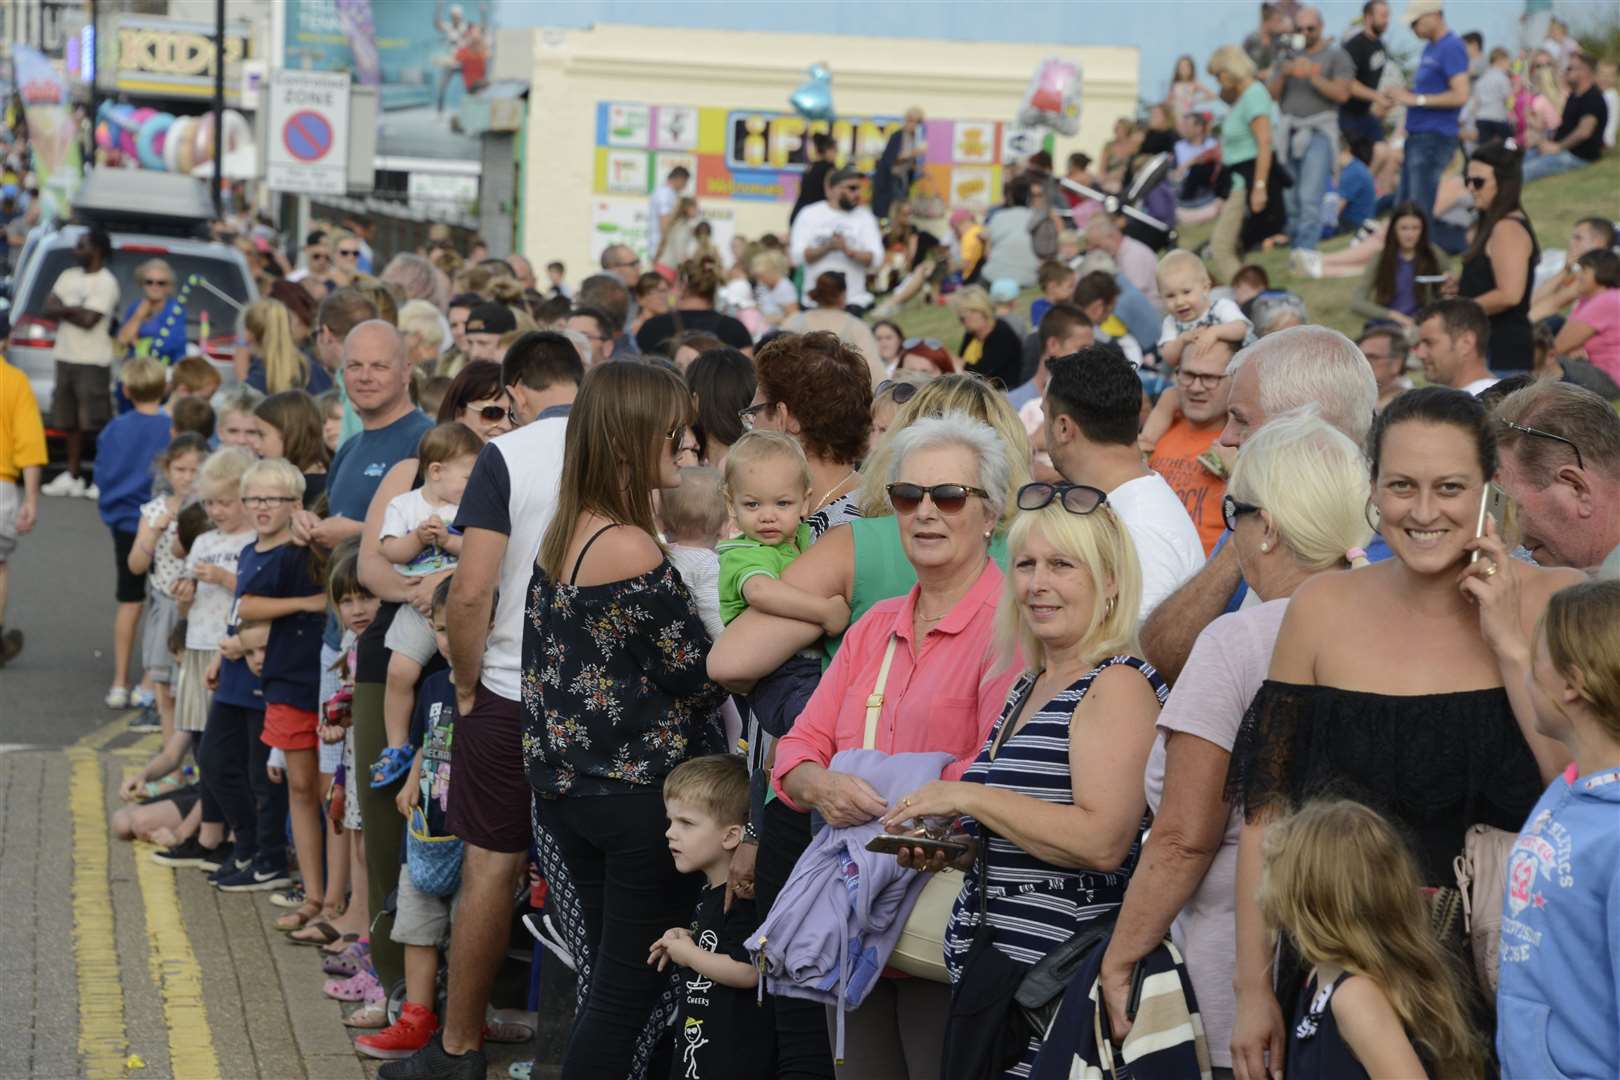 Scores of people at the Herne Bay Carnival in 2018. Picture: Paul Amos